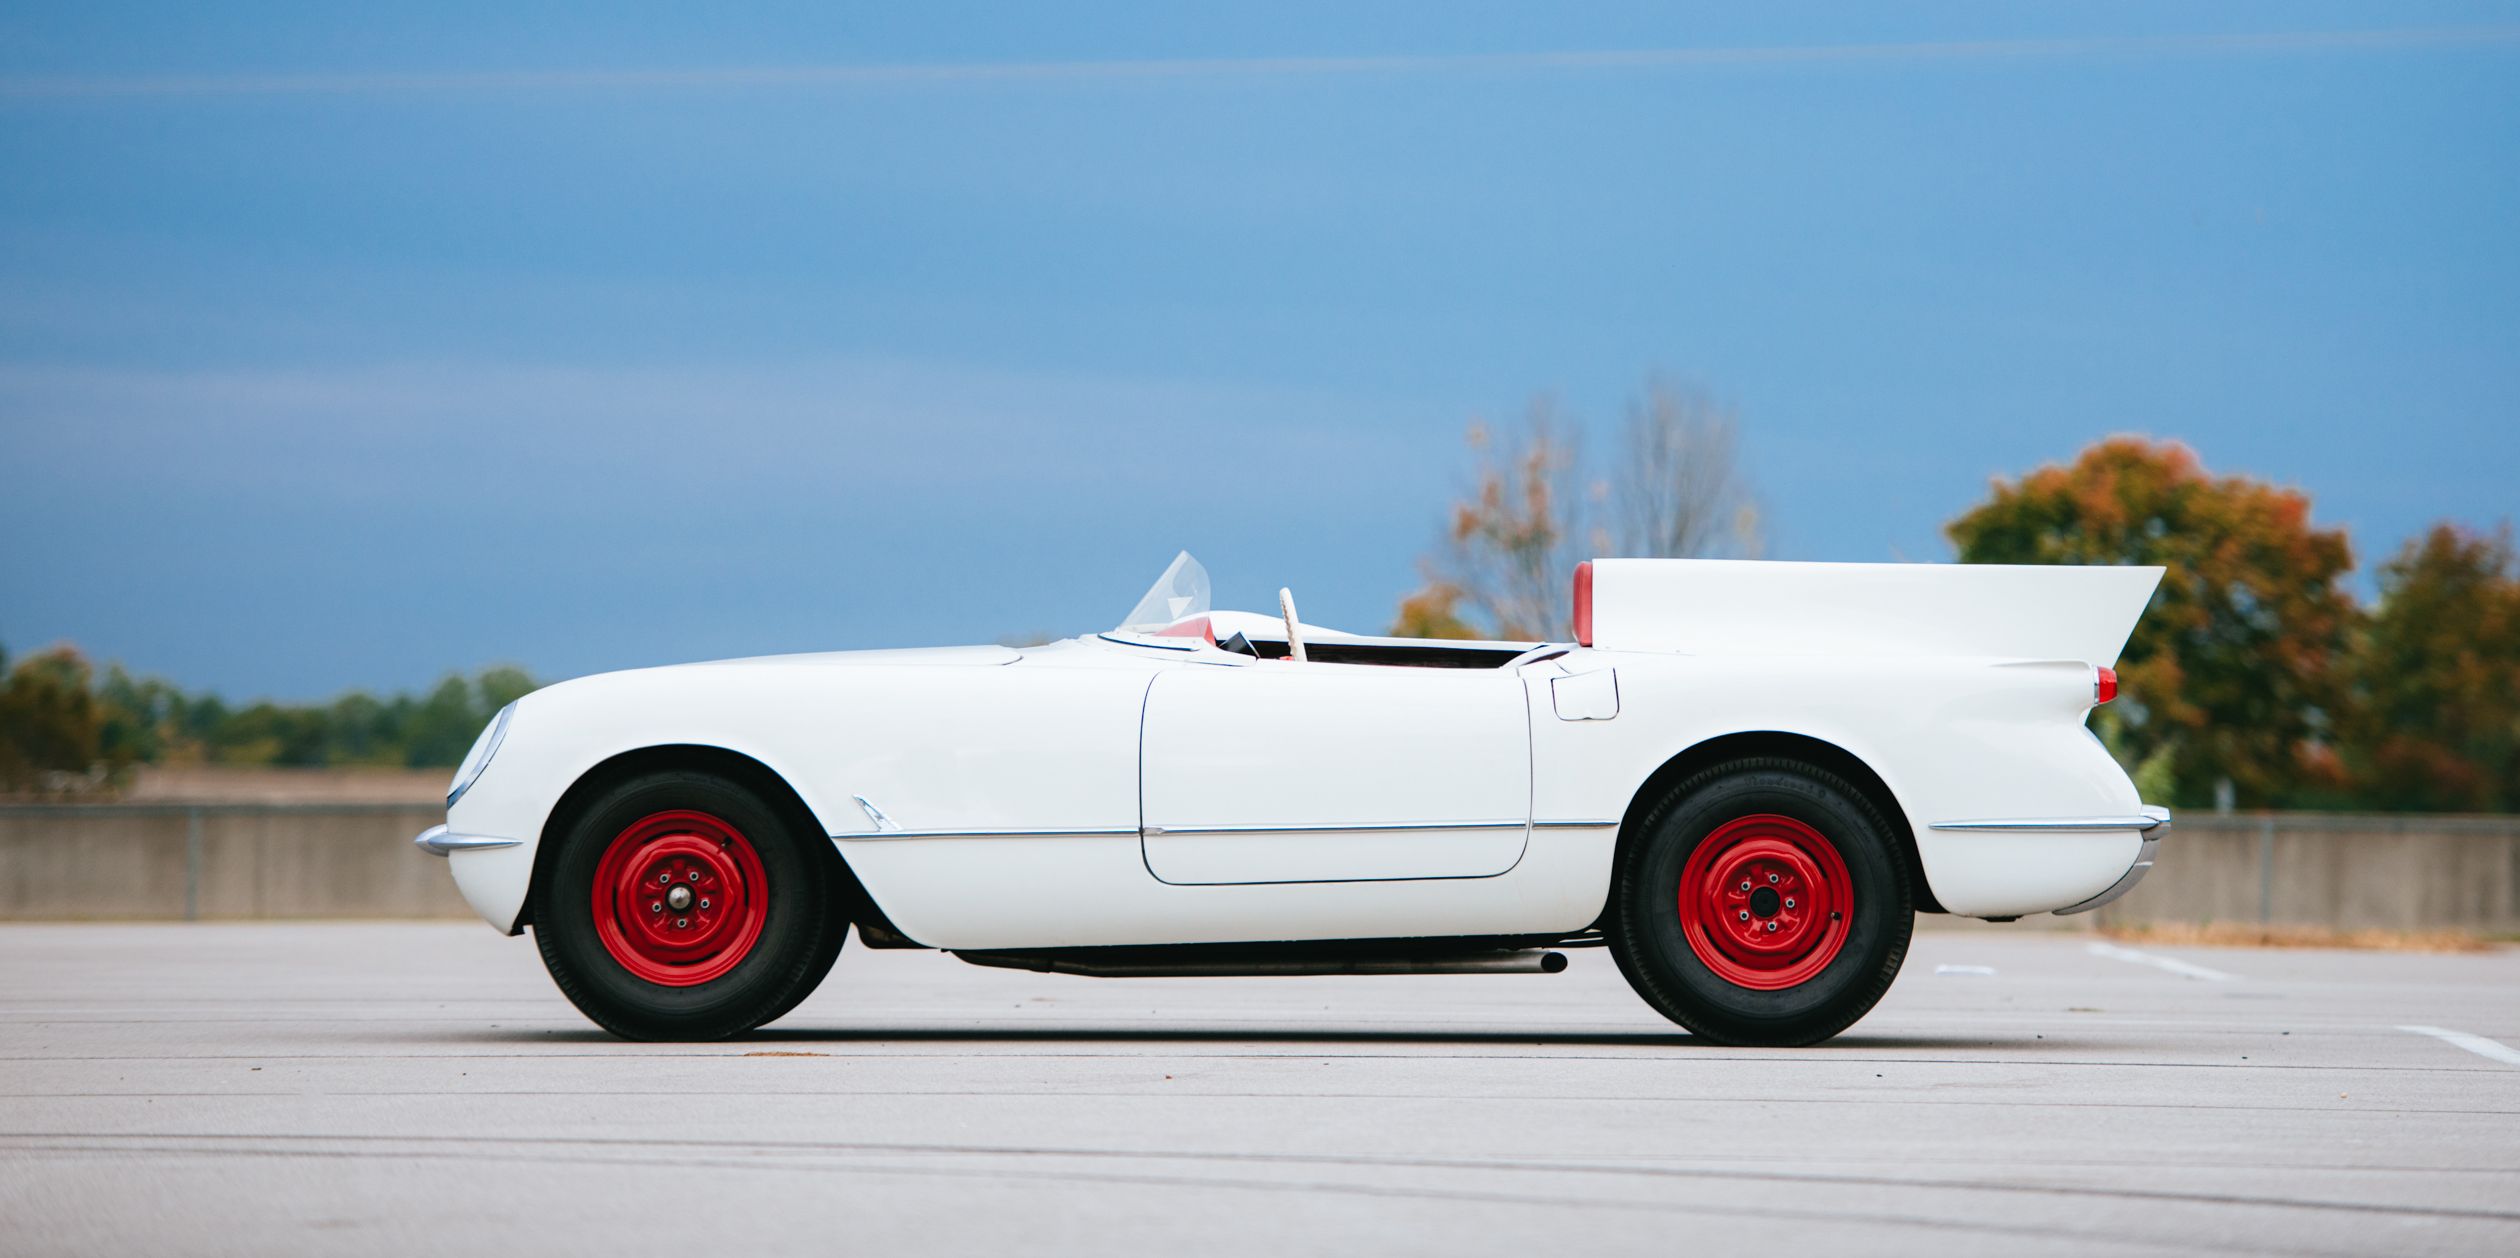 This Is the Moment the Corvette Became the American Sports Car